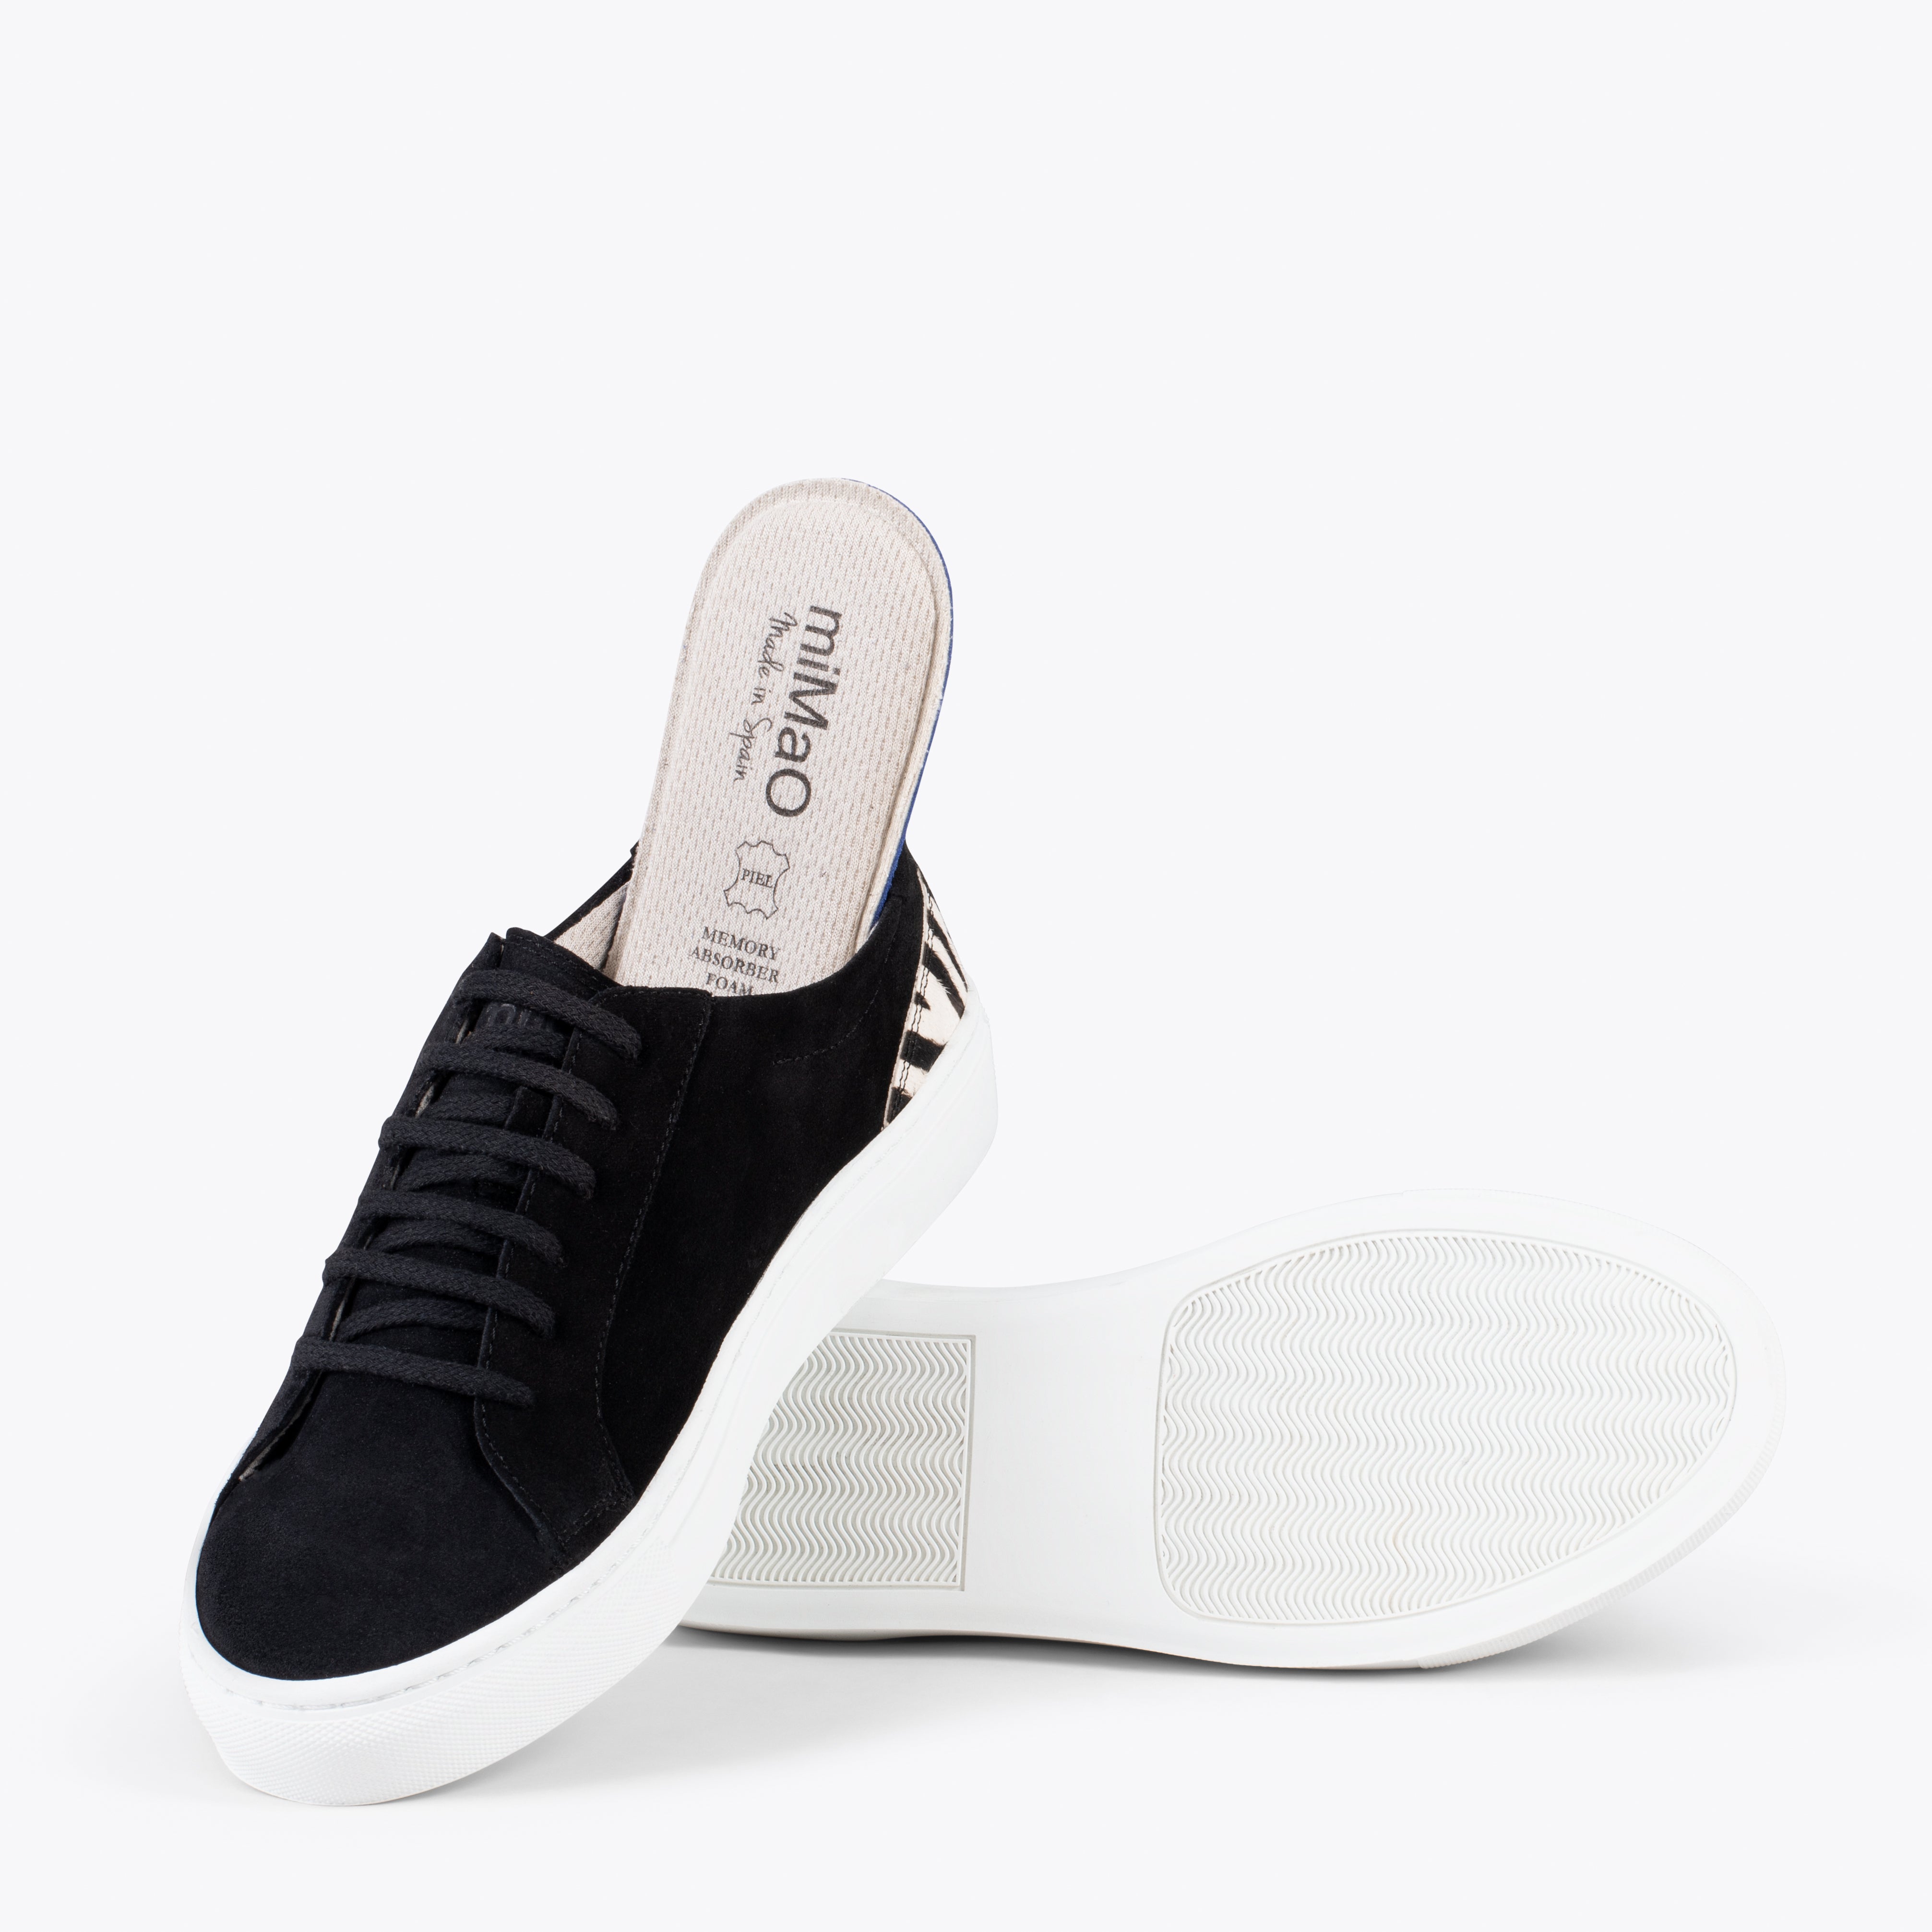 ENJOY – BLACK AND ZEBRA suede lifestyle sneakers